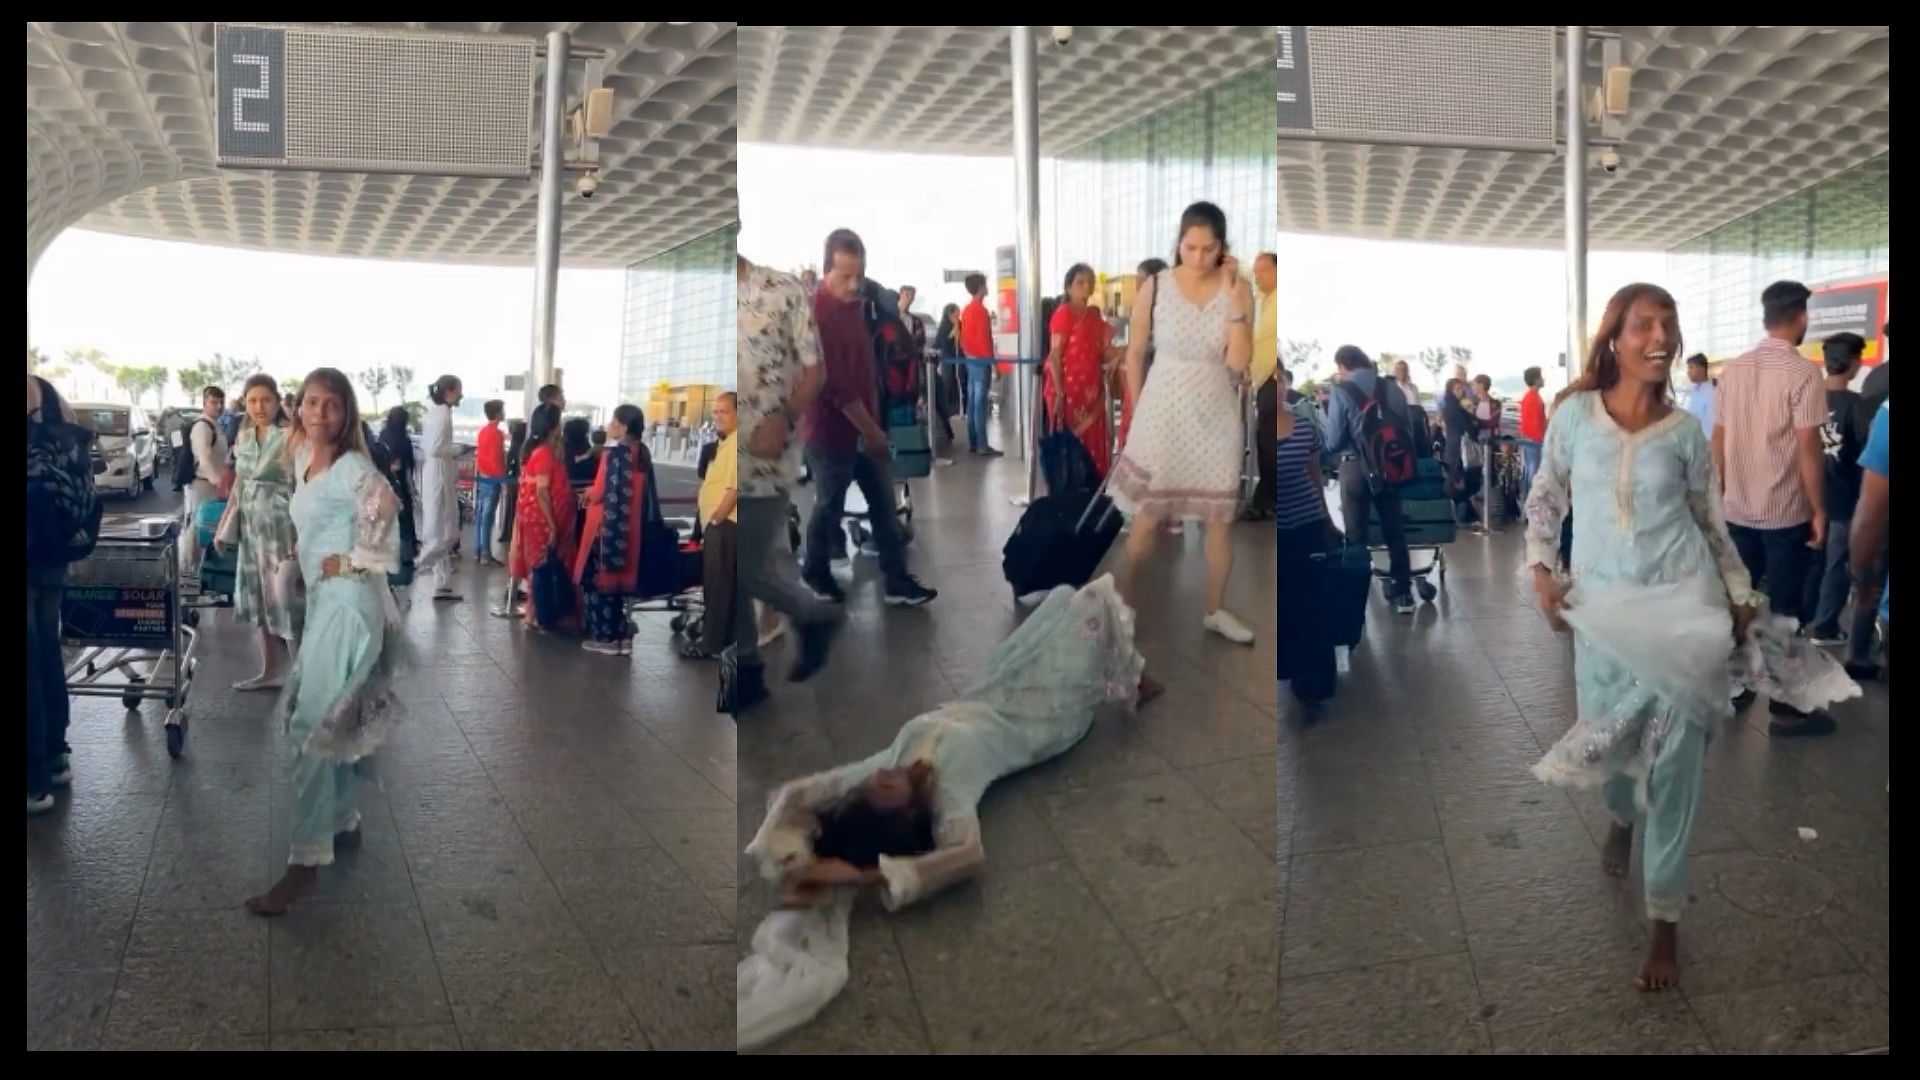 Woman weird dance at mumbai airport social media Users got angry after watching the video